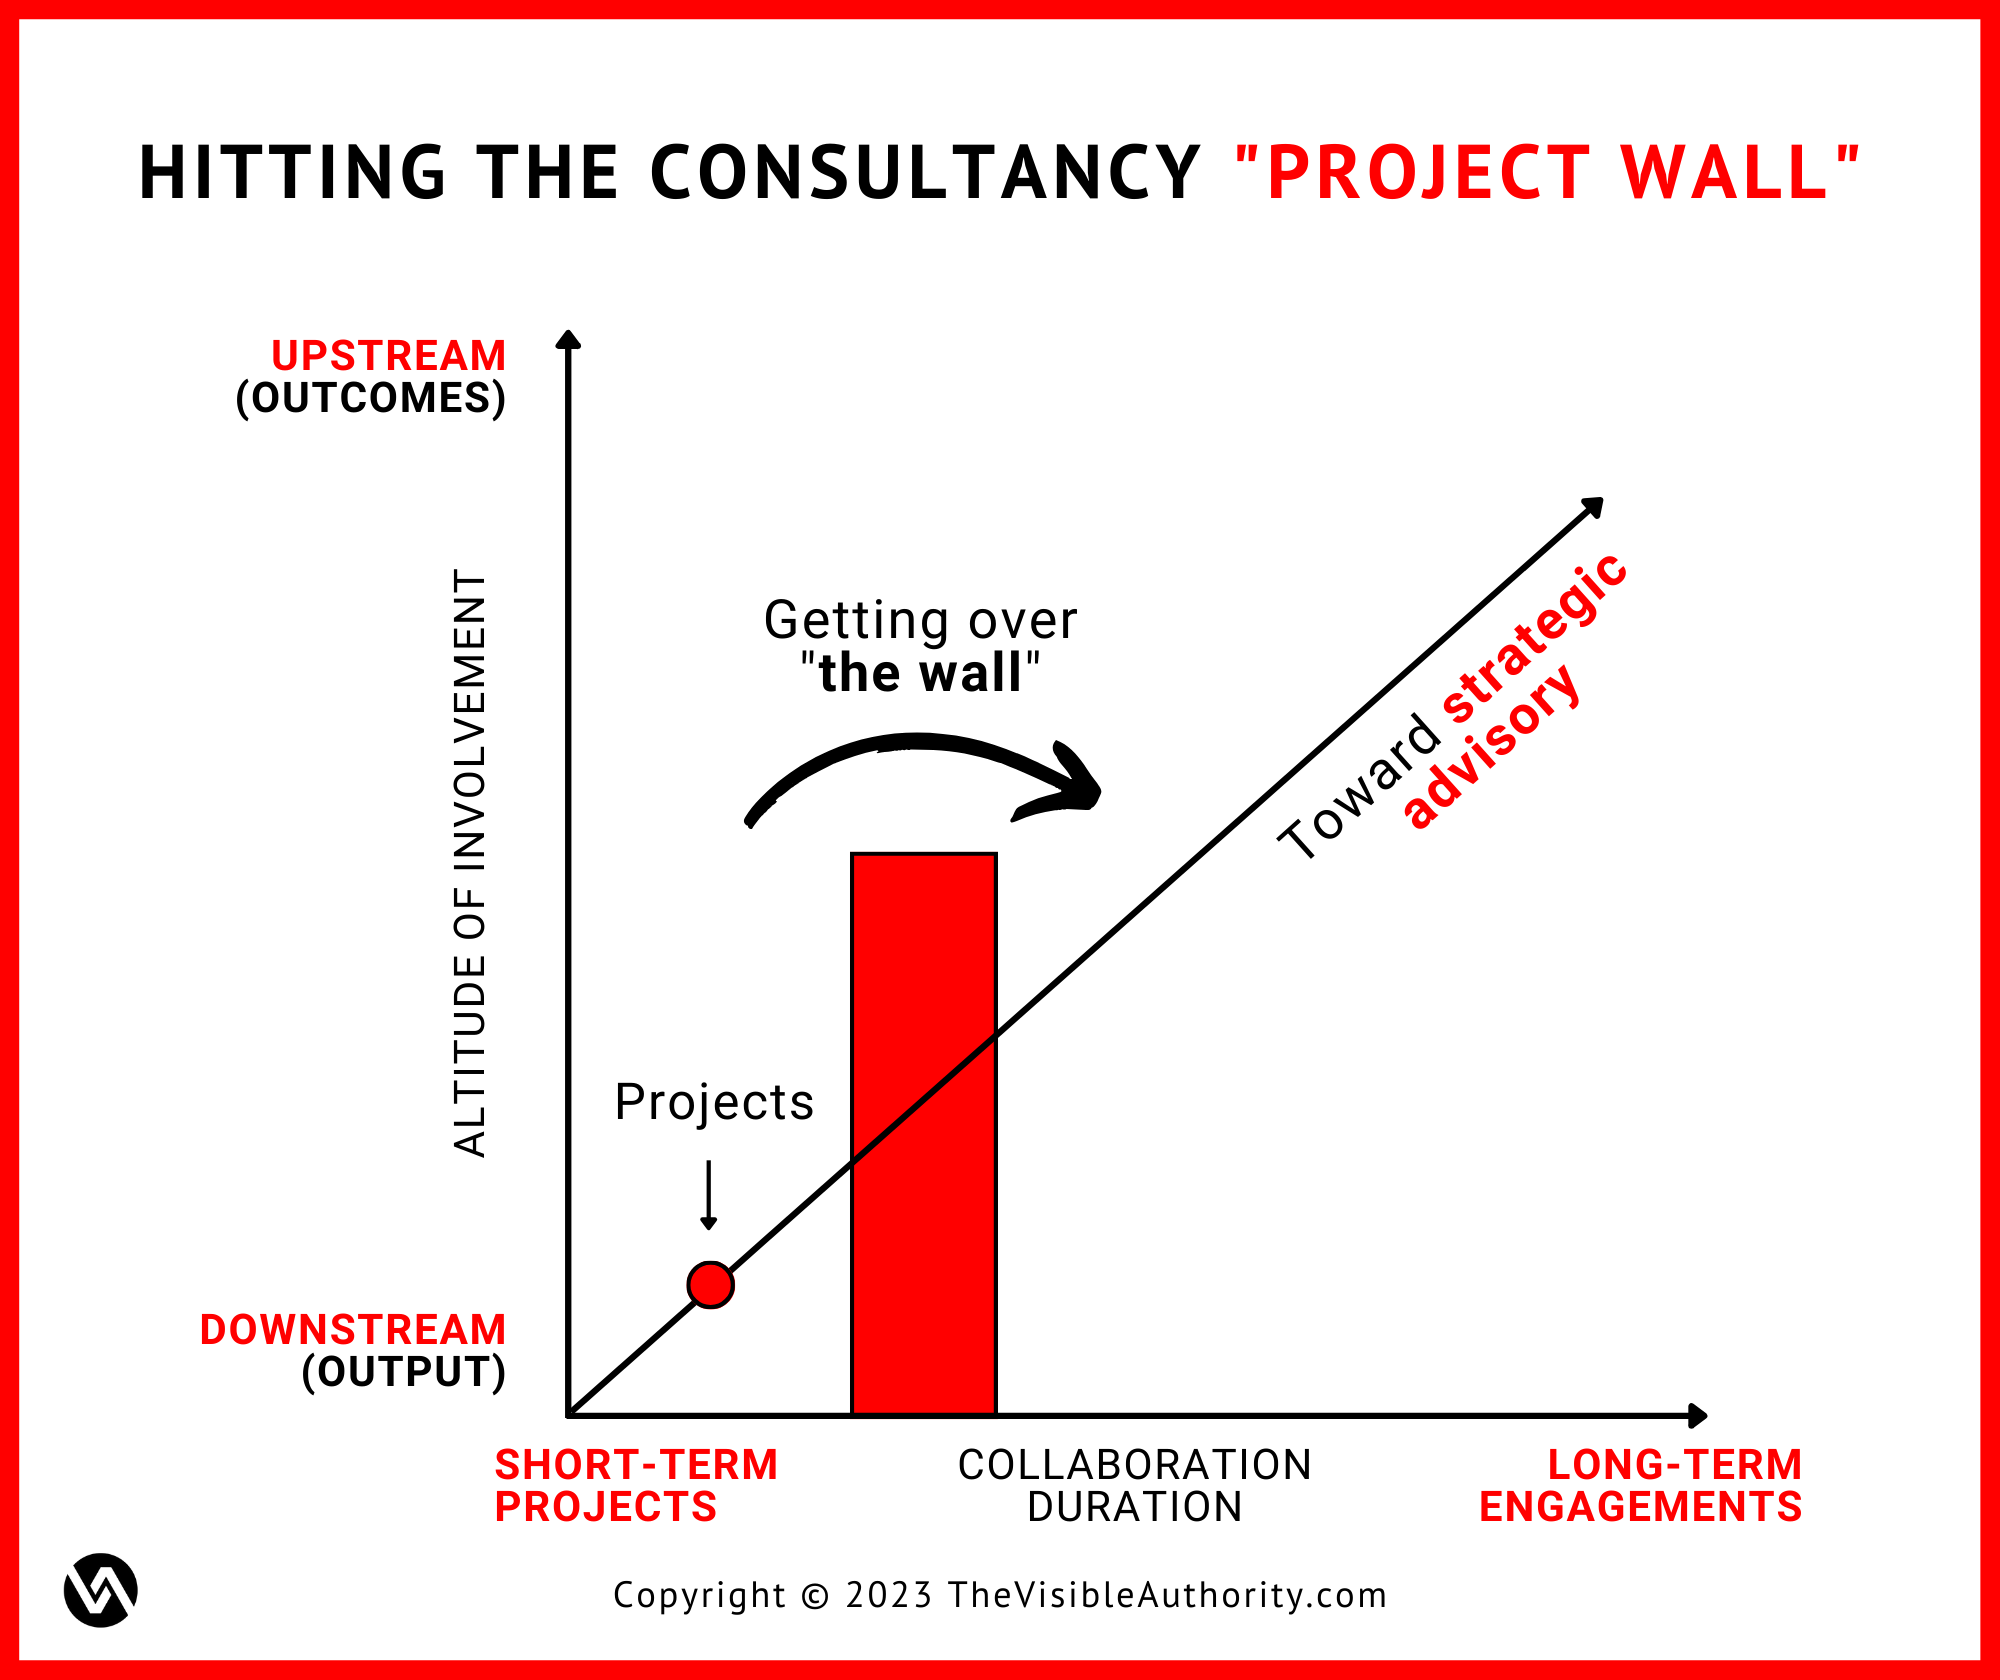 Hitting the consultancy project wall